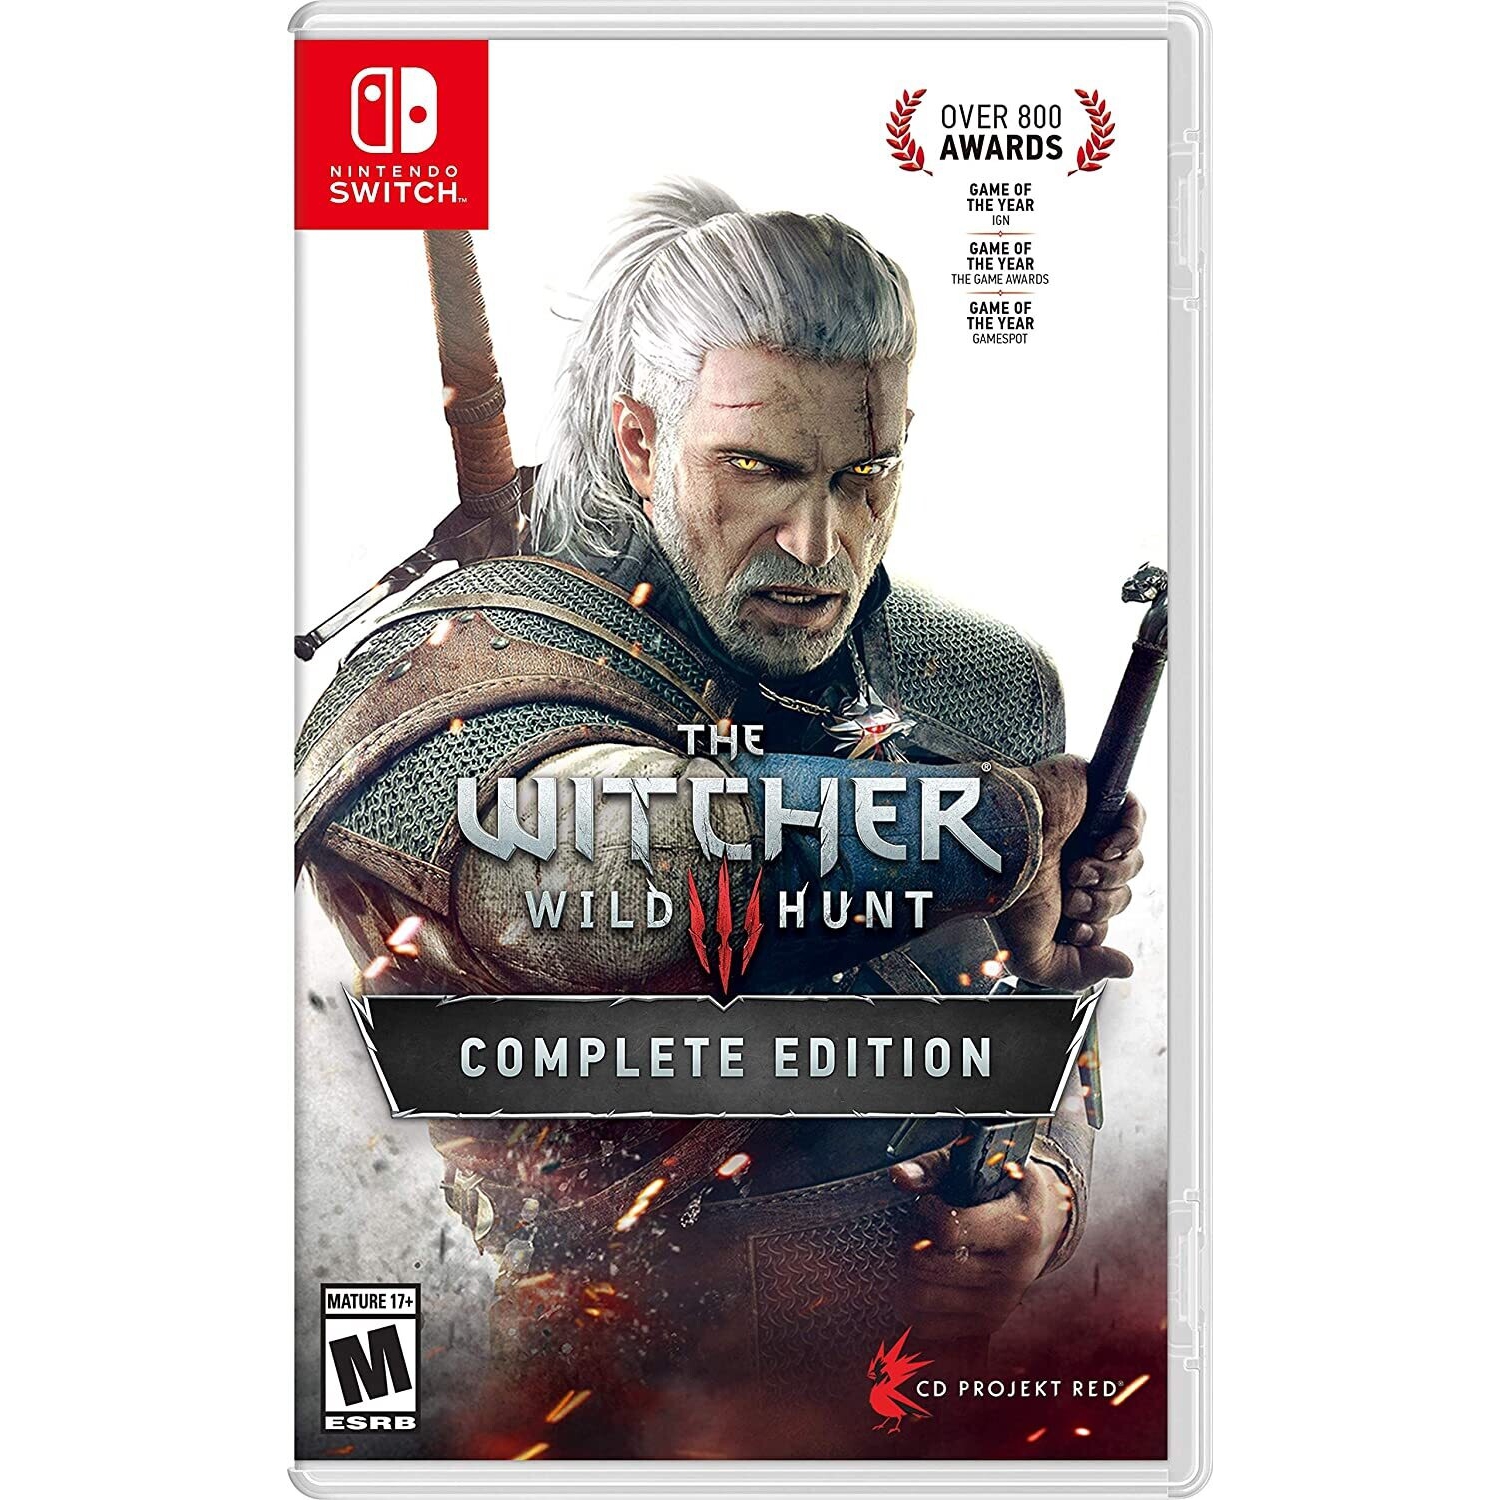 Witcher 3: Wild Hunt for Nintendo Switch [VIDEOGAMES]